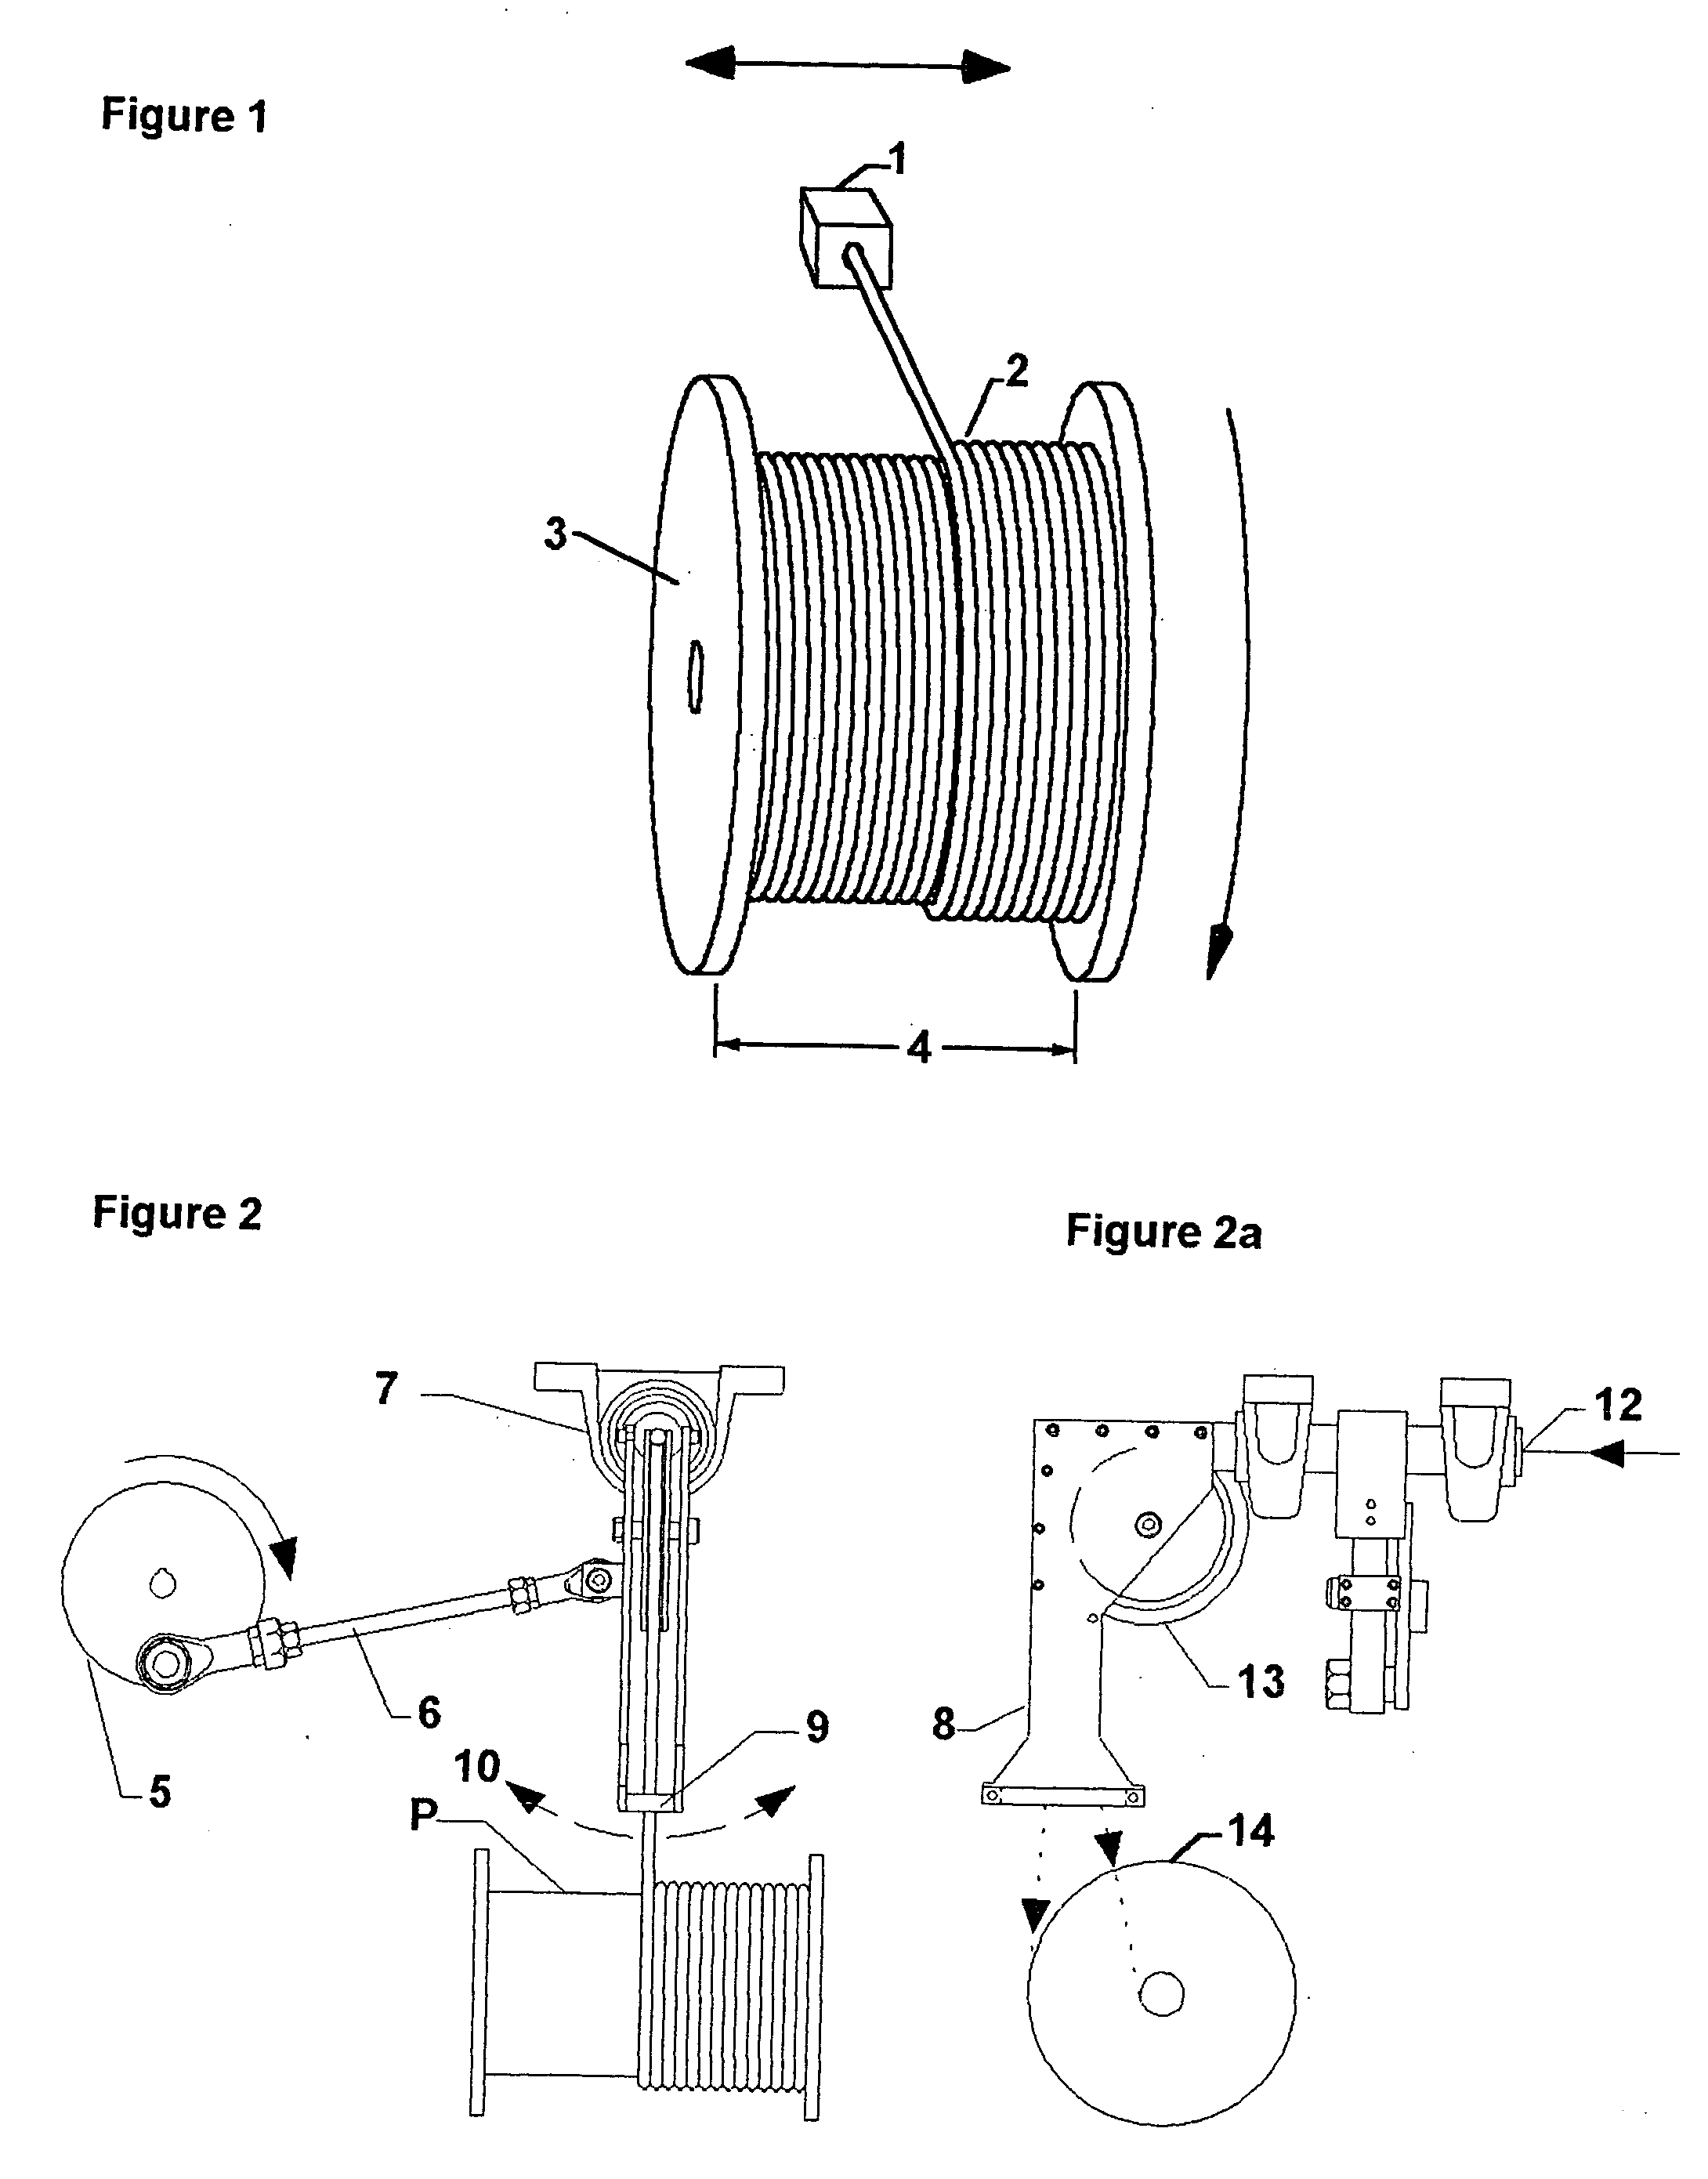 Device for traversing a flexible linear product for spooling